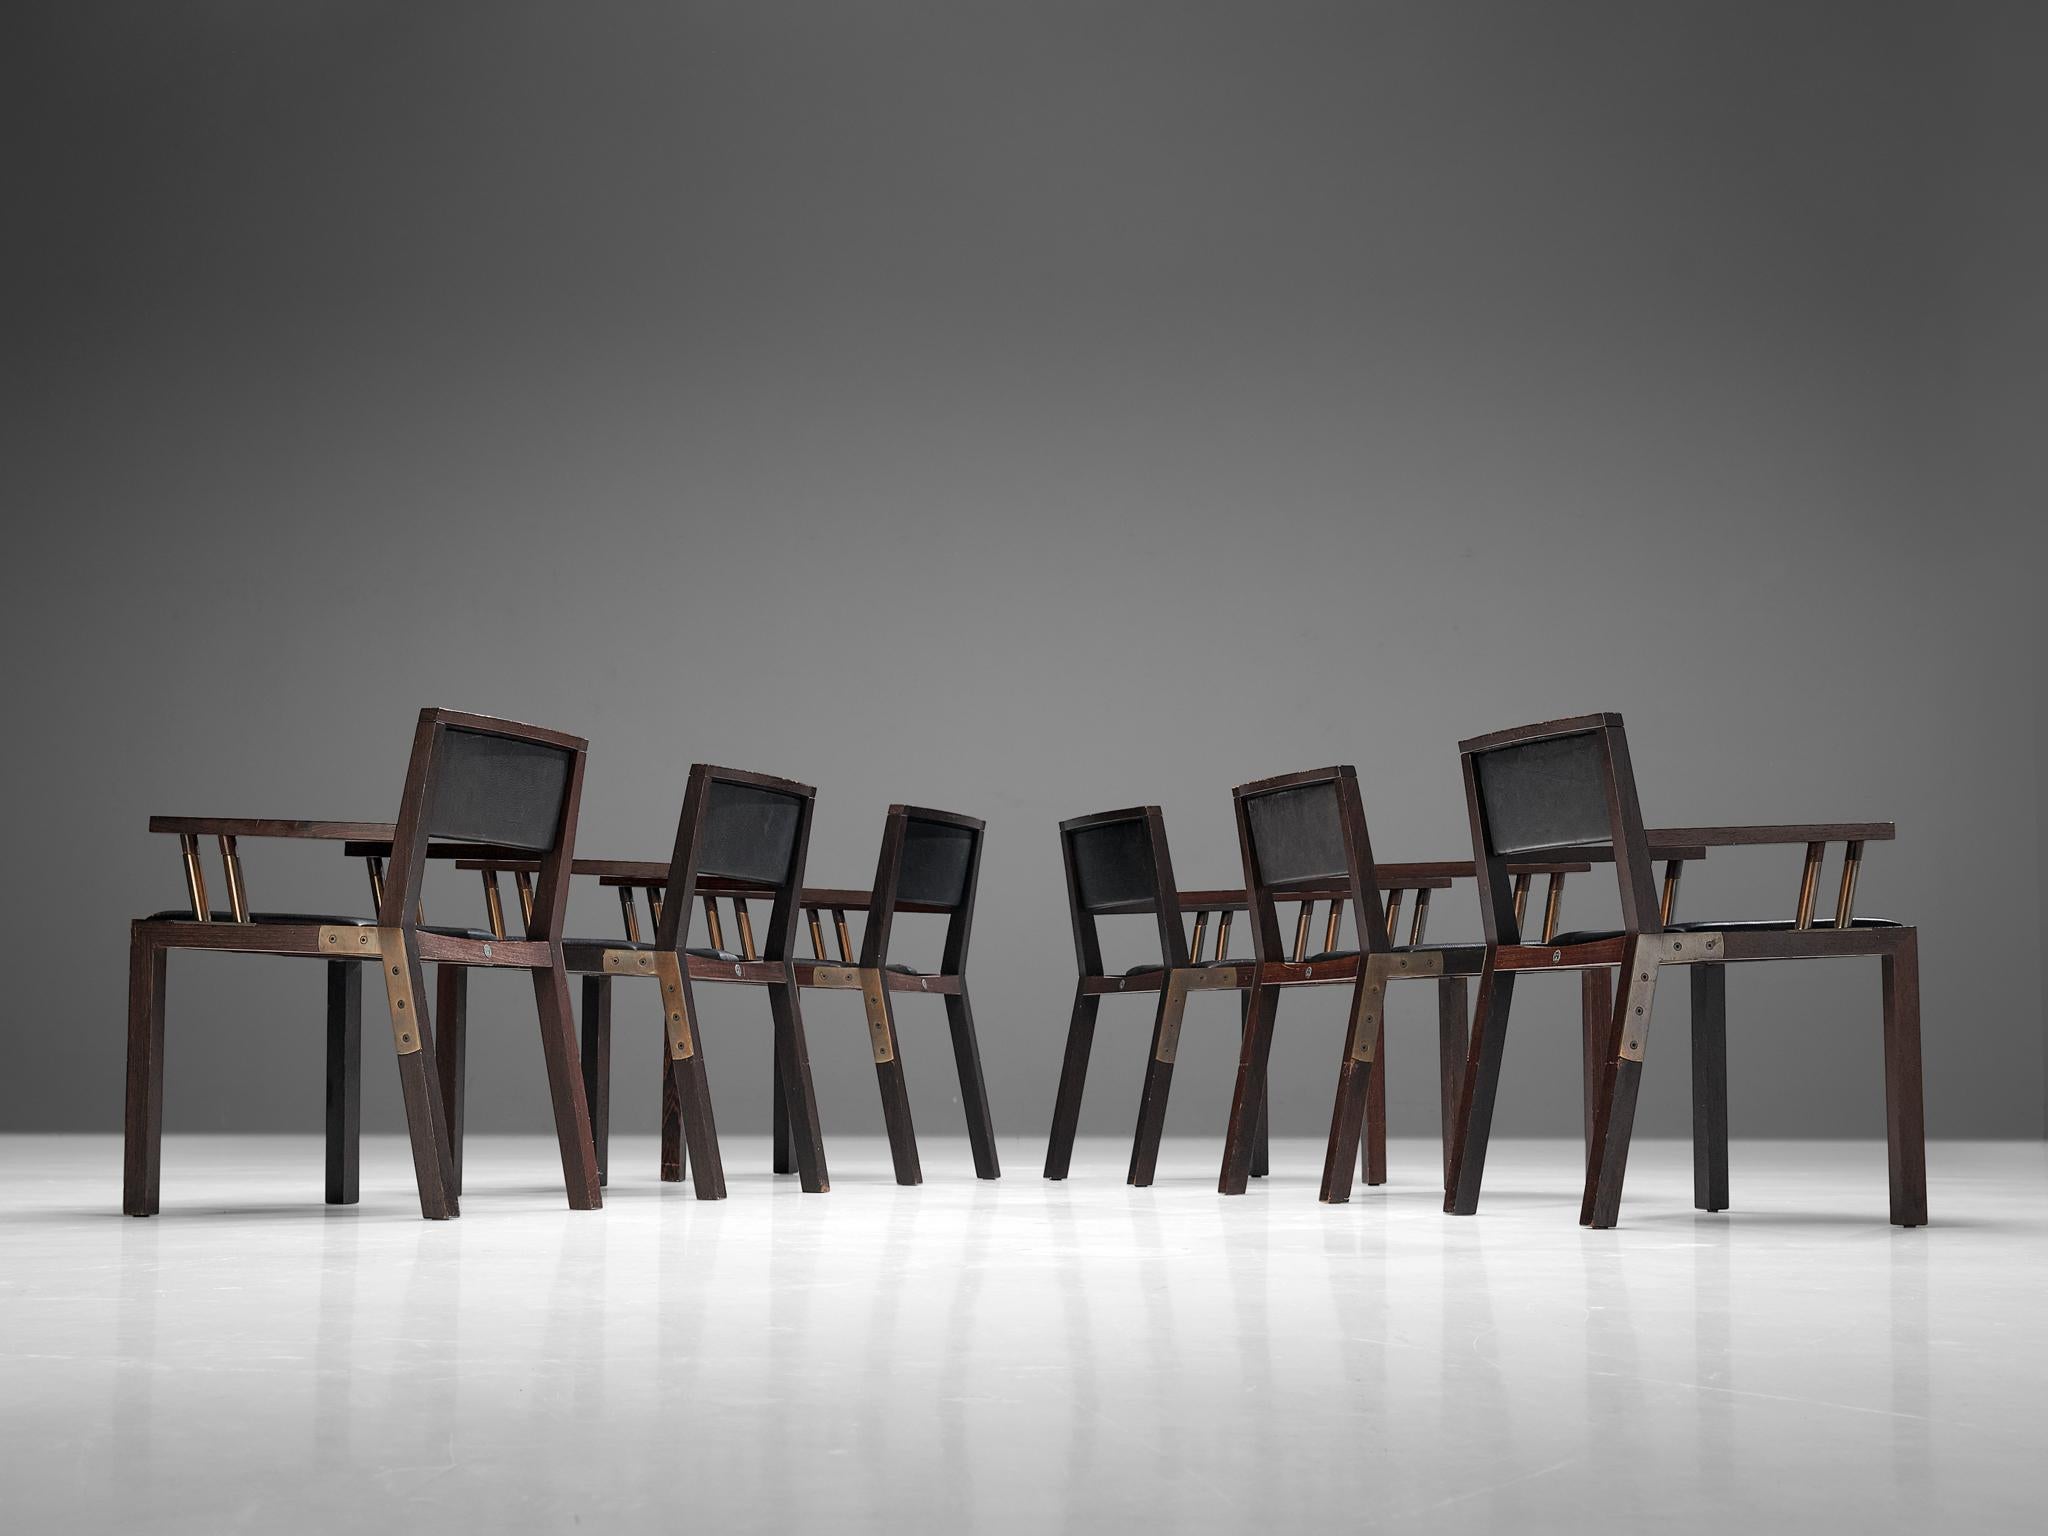 Rare Jean-Michel Wilmotte ‘Grand Louvre’ Set of Six Dining Chairs in Wenge  For Sale 1